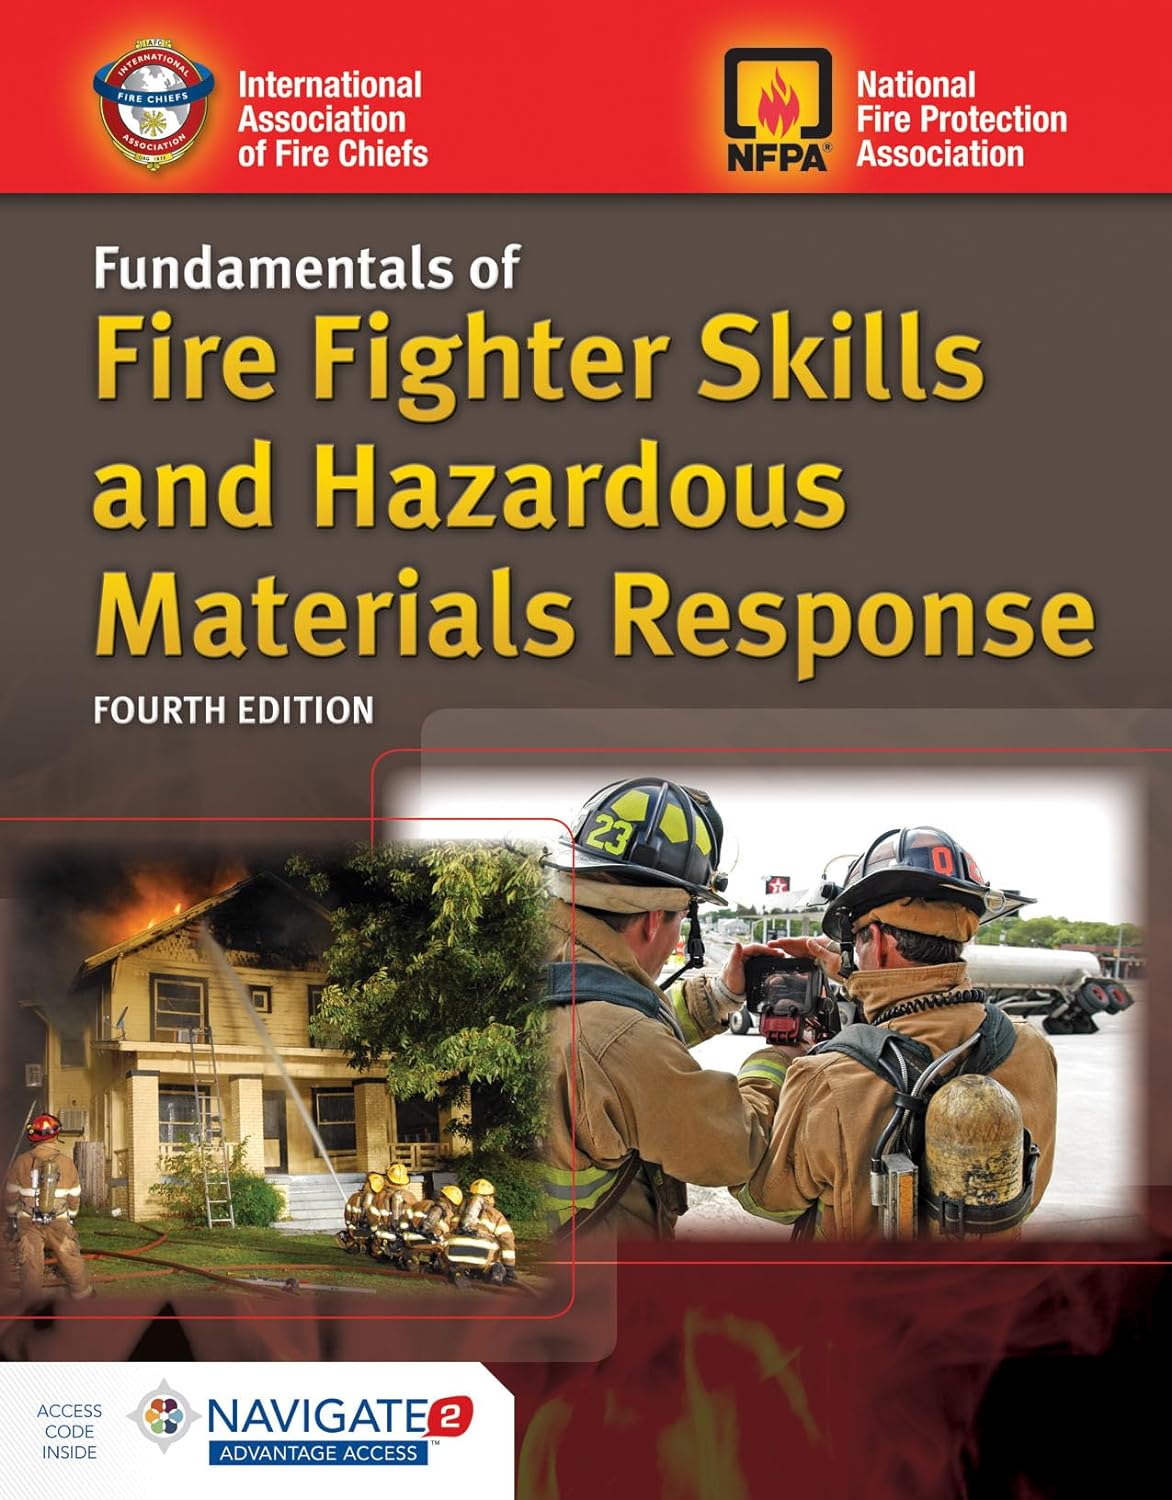 cover image for the test bank accompanying the famous textbook: Fundamentals of Fire Fighter Skills and Hazardous Materials Response, 4th Edition